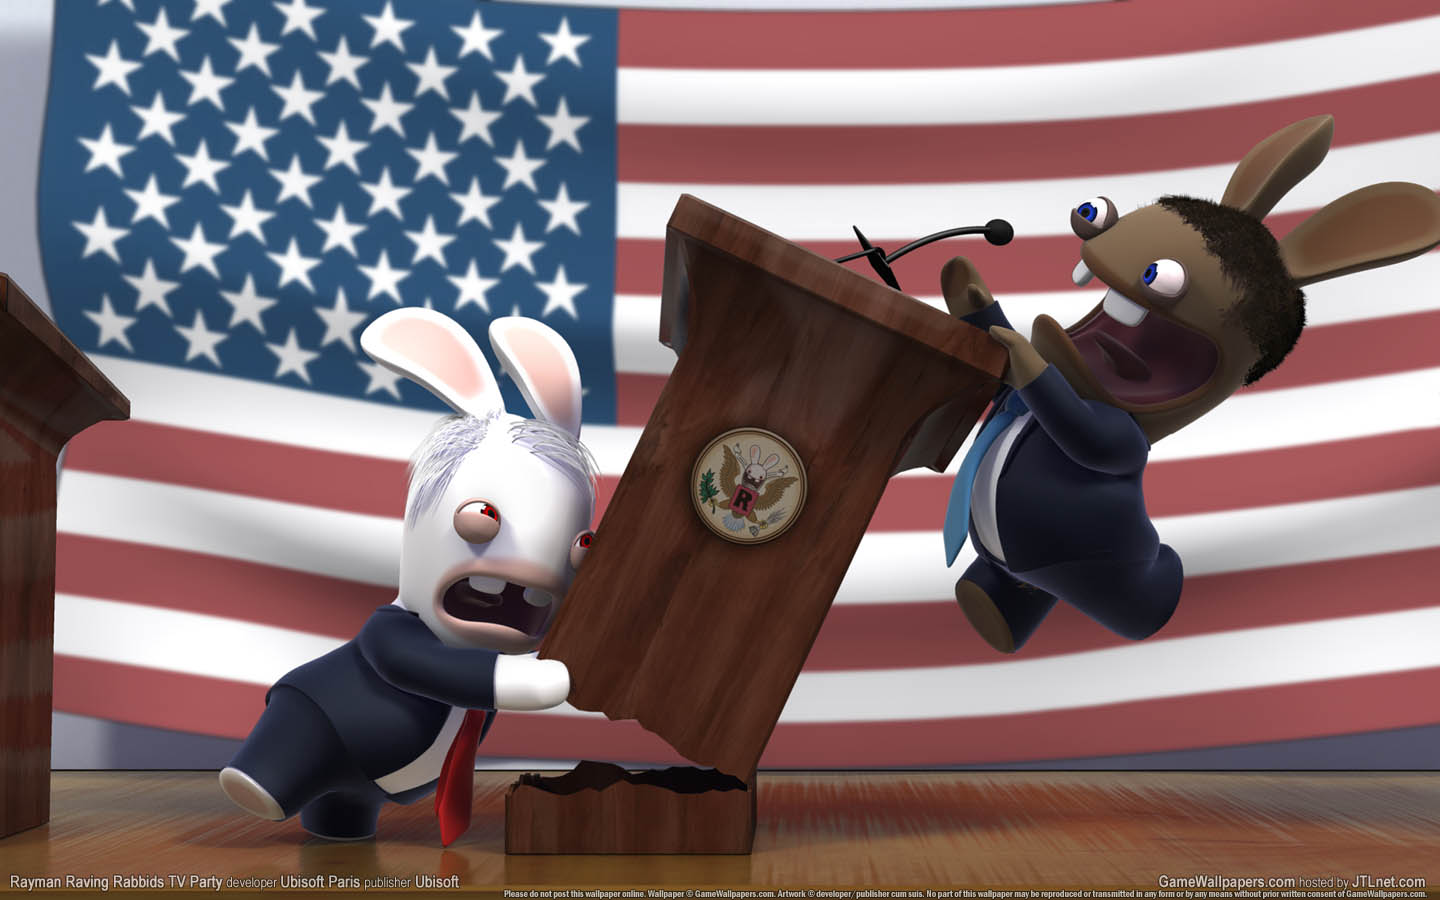 Rayman Raving Rabbids TV Party achtergrond 07 1440x900